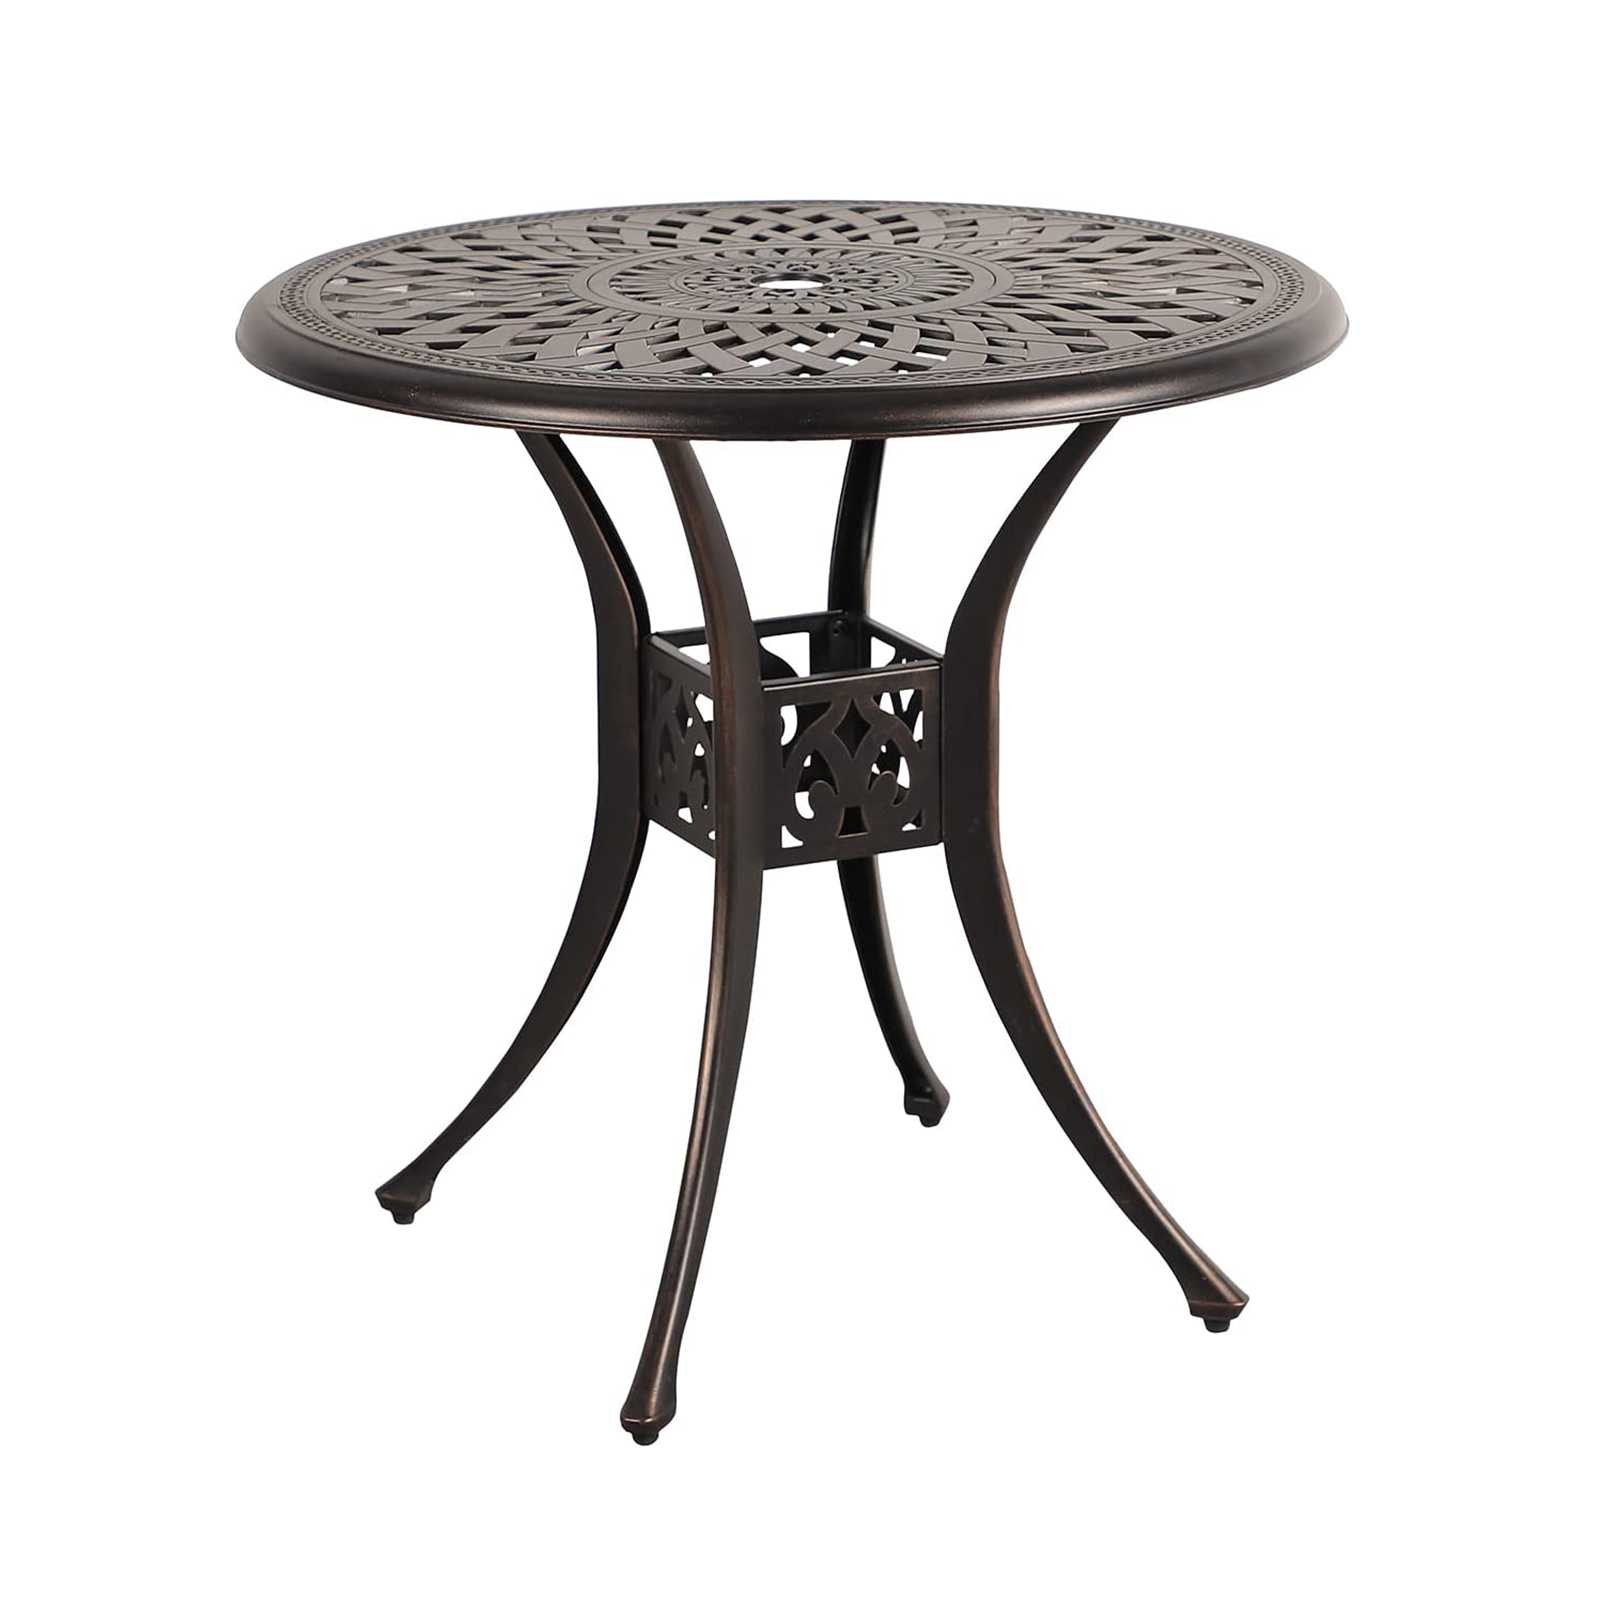 Patio Bistro Table, 31" Round Cast Aluminum Outdoor Dinning Table, Retro Side Table with Umbrella Hole, Antique Bronze - image 1 of 8